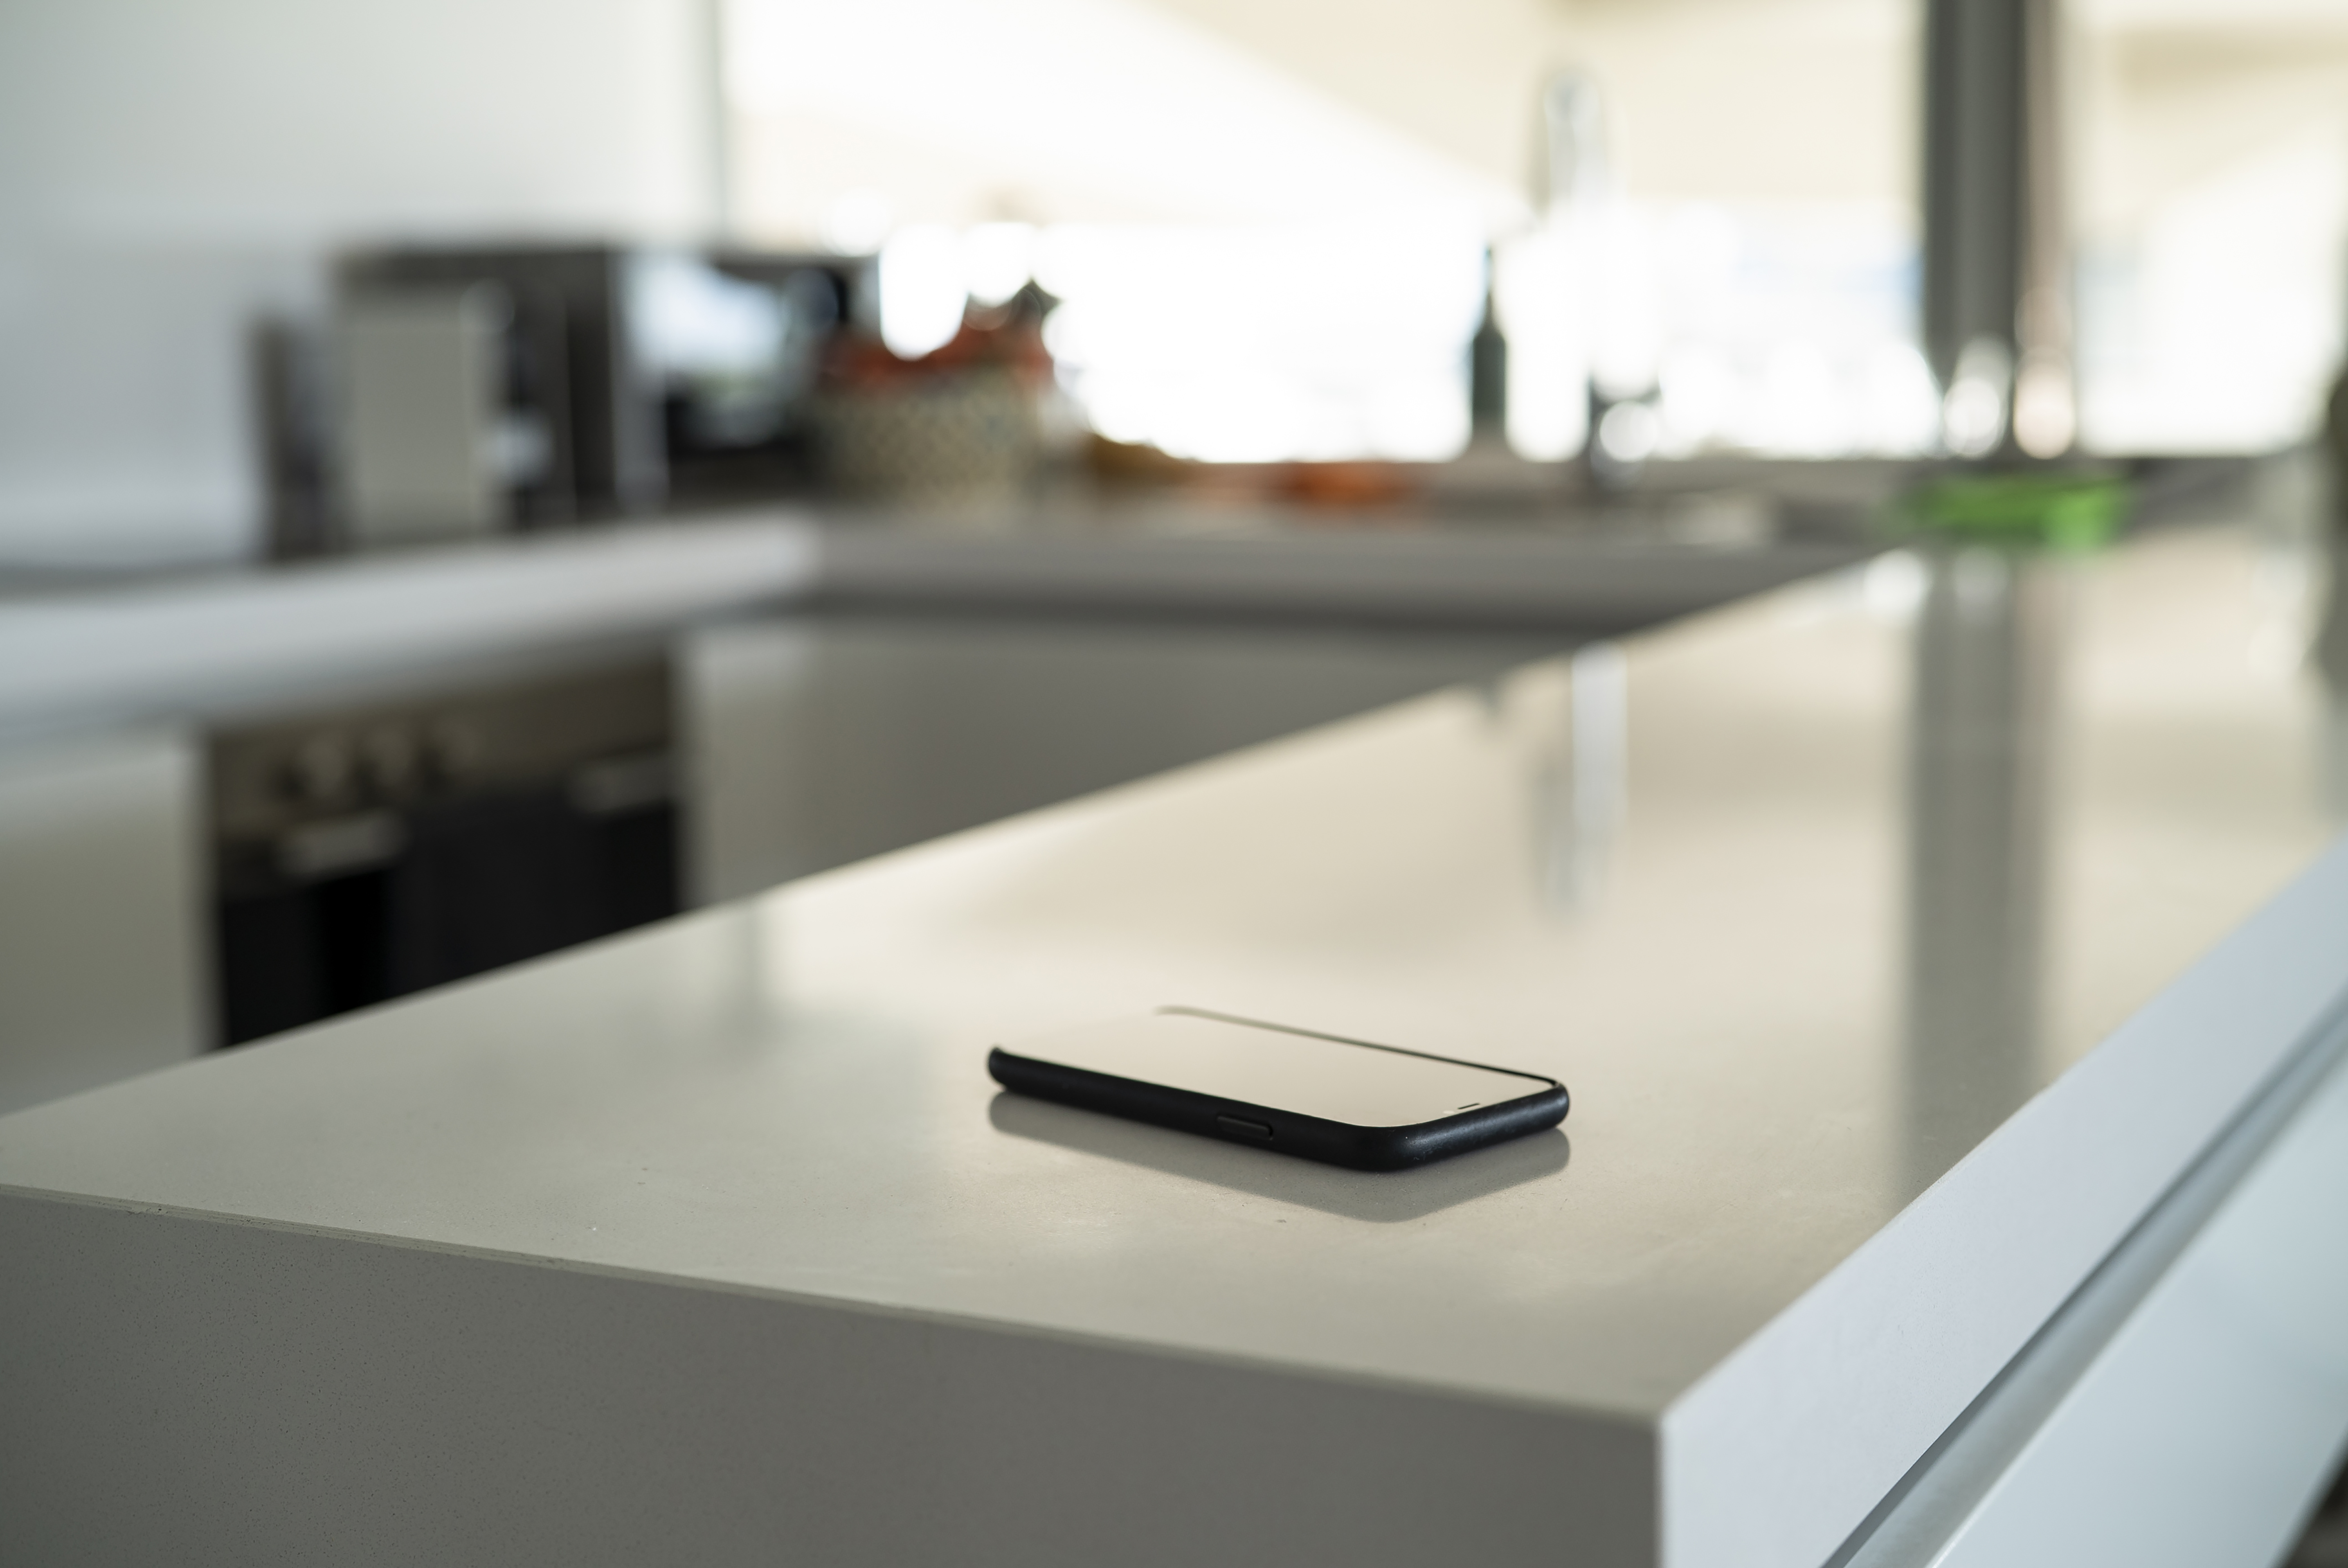 A smart phone on the kitchen counter | Source: Getty Images